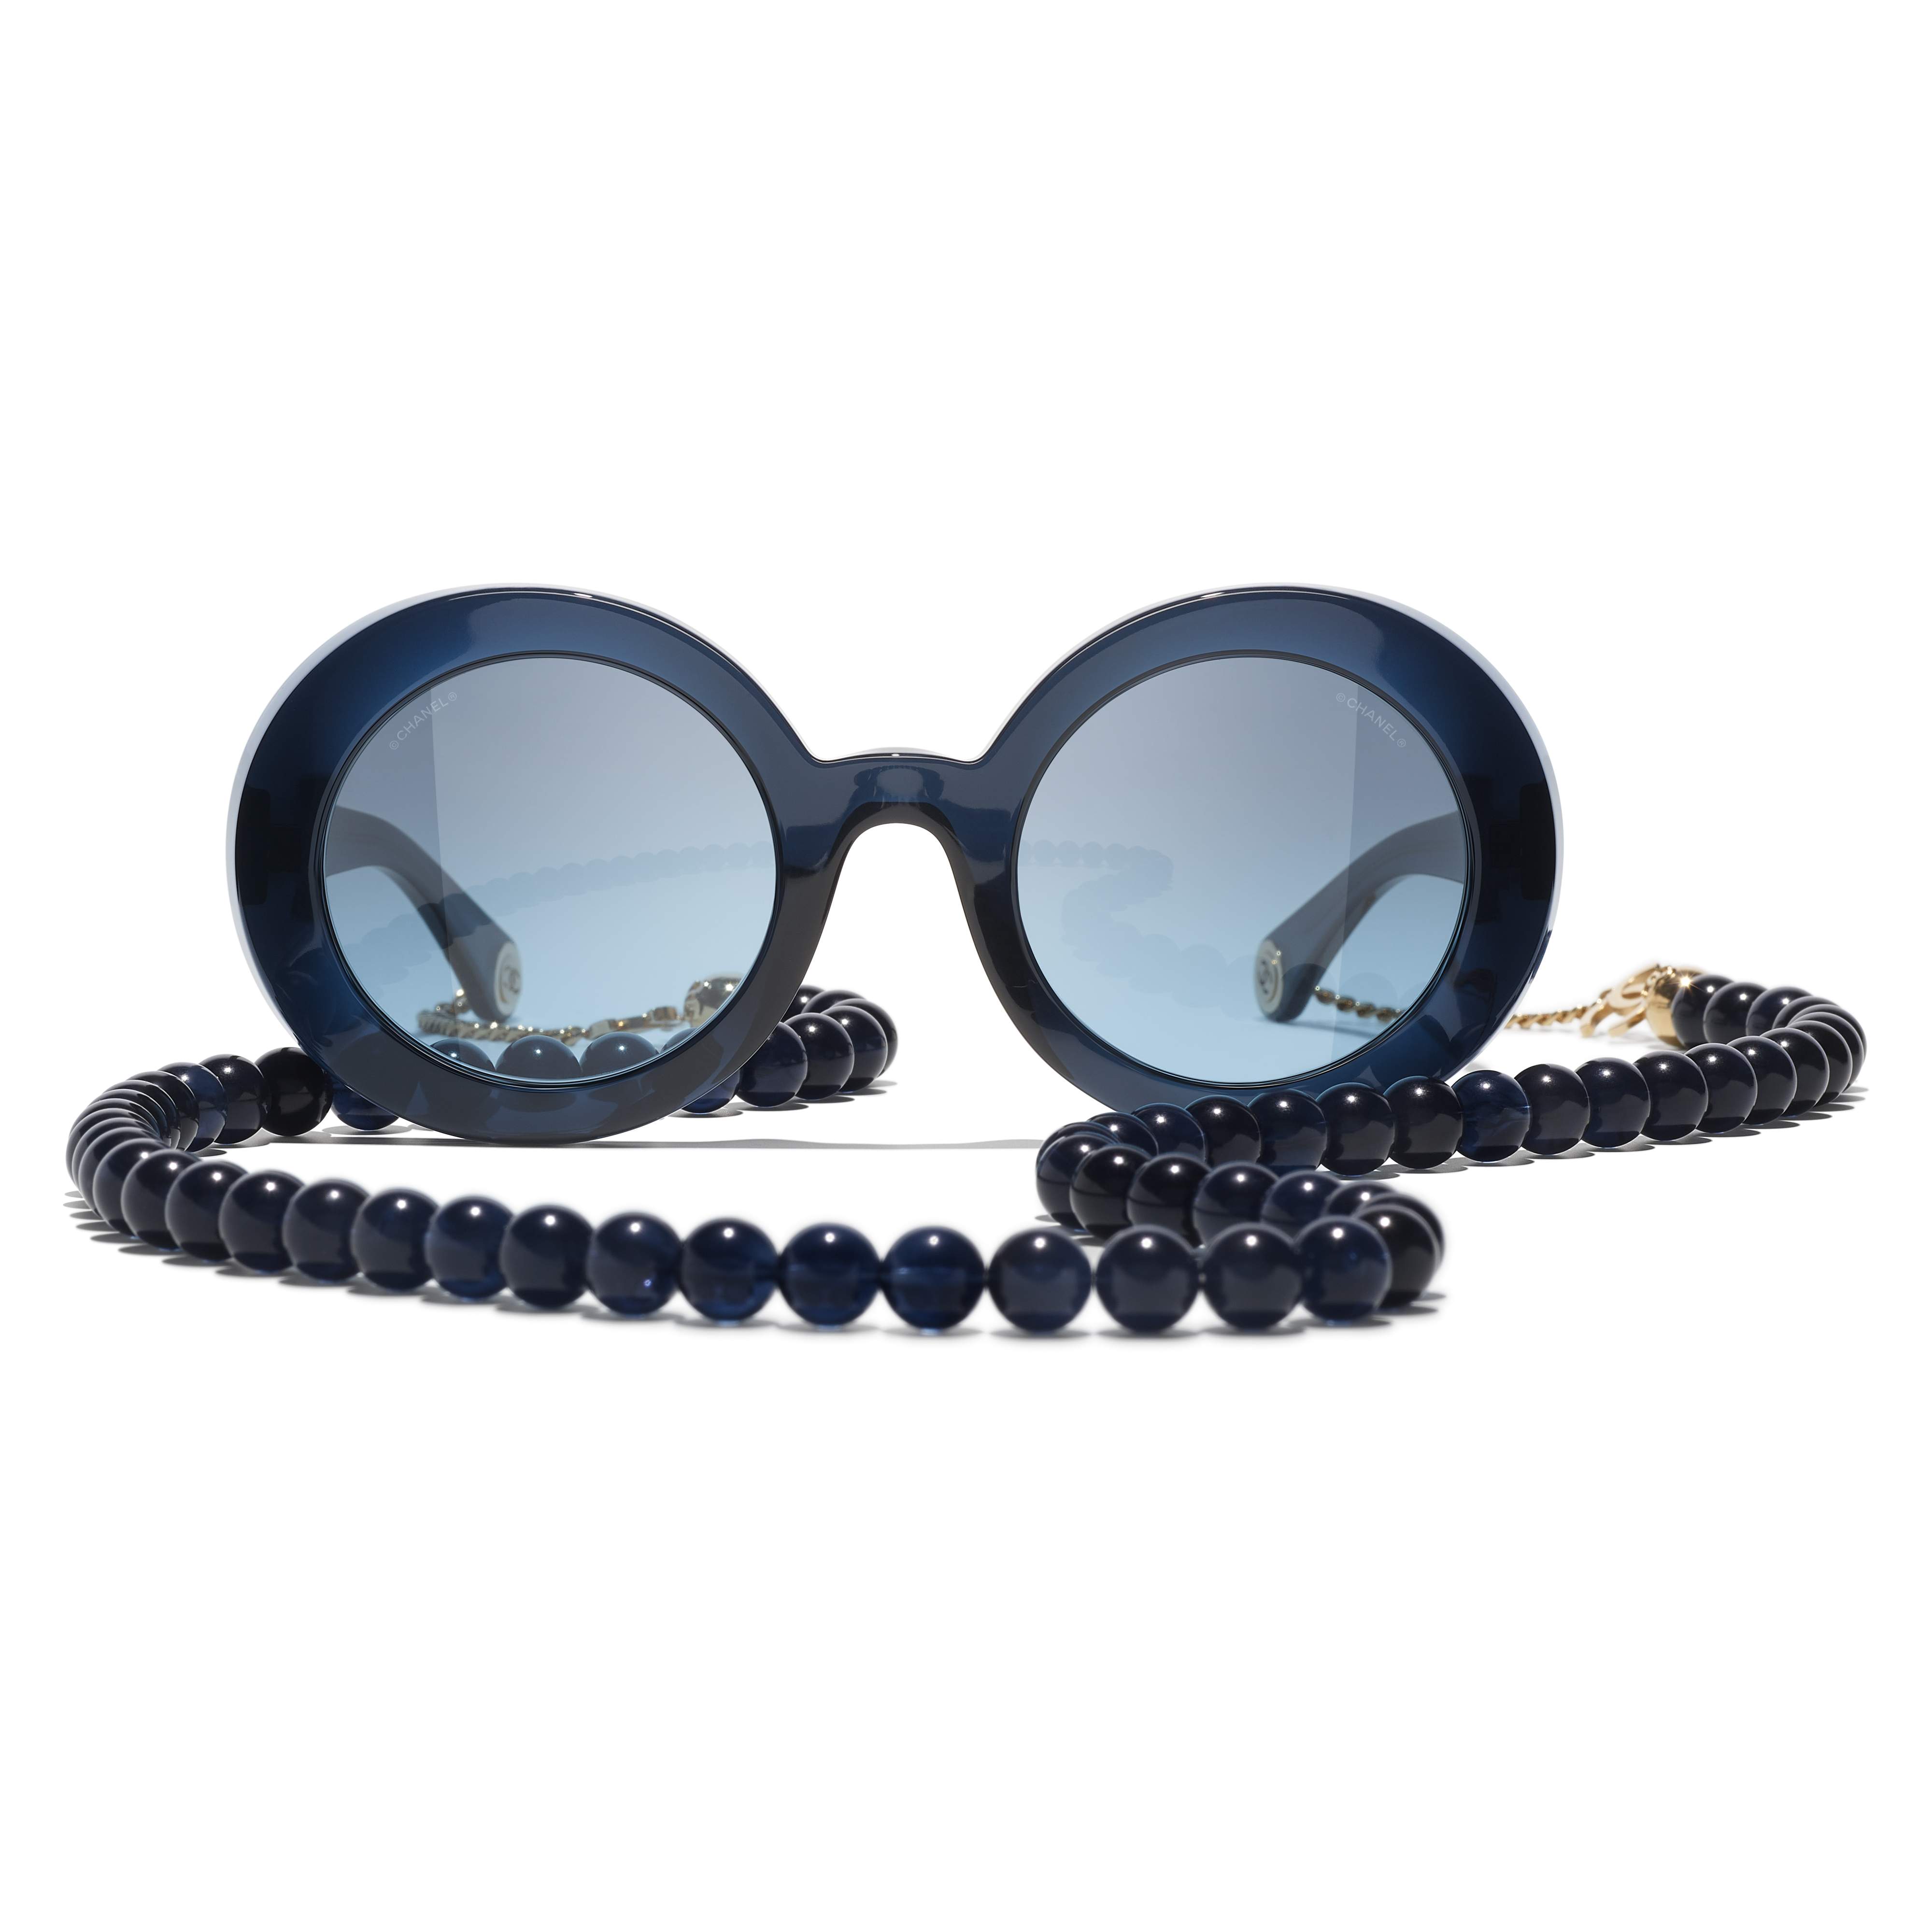 NEW CHANEL CH 5409 c.508/S2 55mm Blue Twine Cat Eye Sunglasses Italy  $270.00 - PicClick